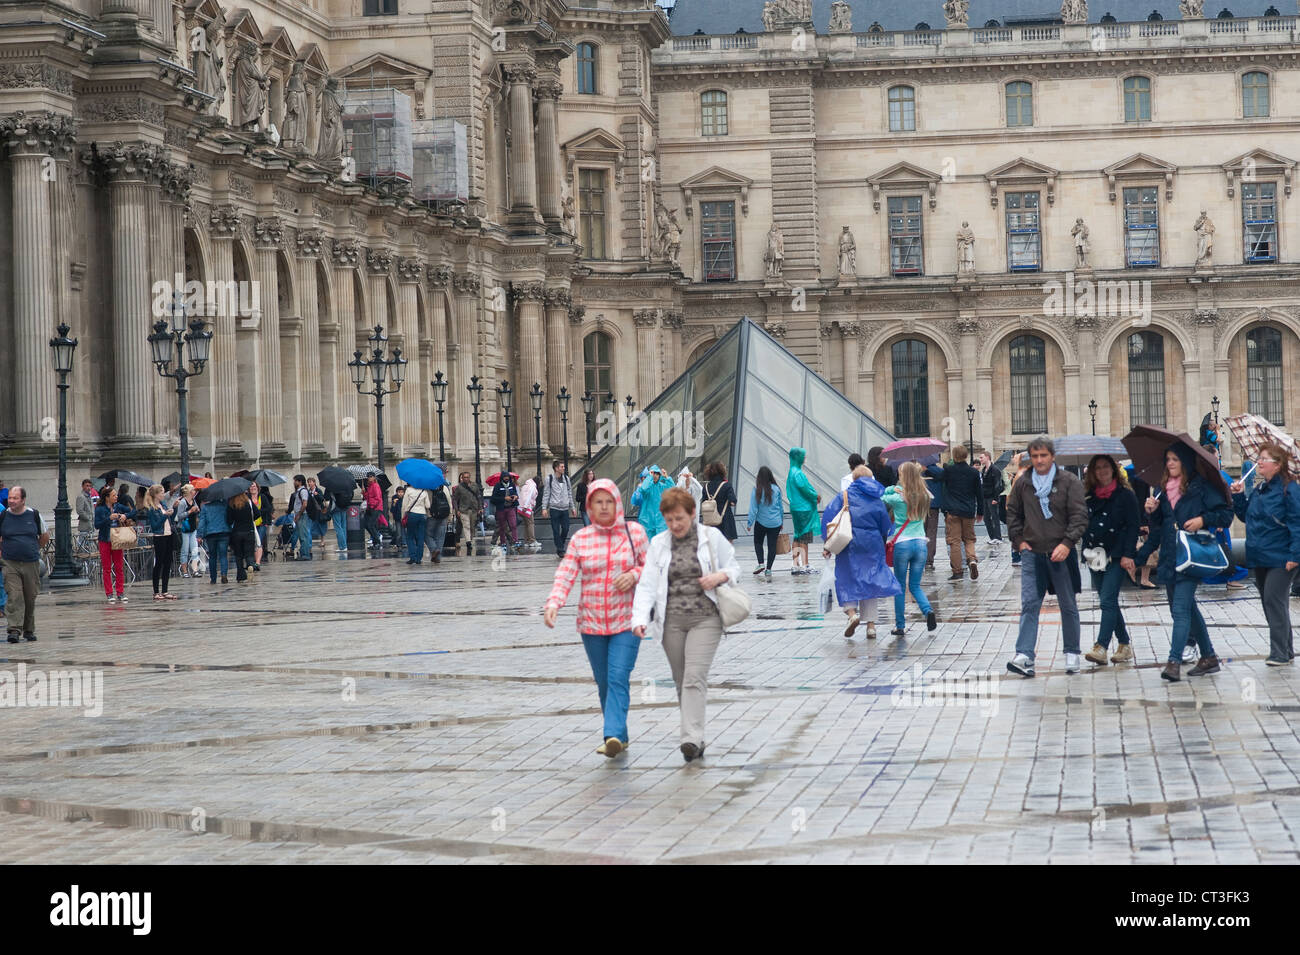 Paris, France - Tourists in a rainy day. Stock Photo